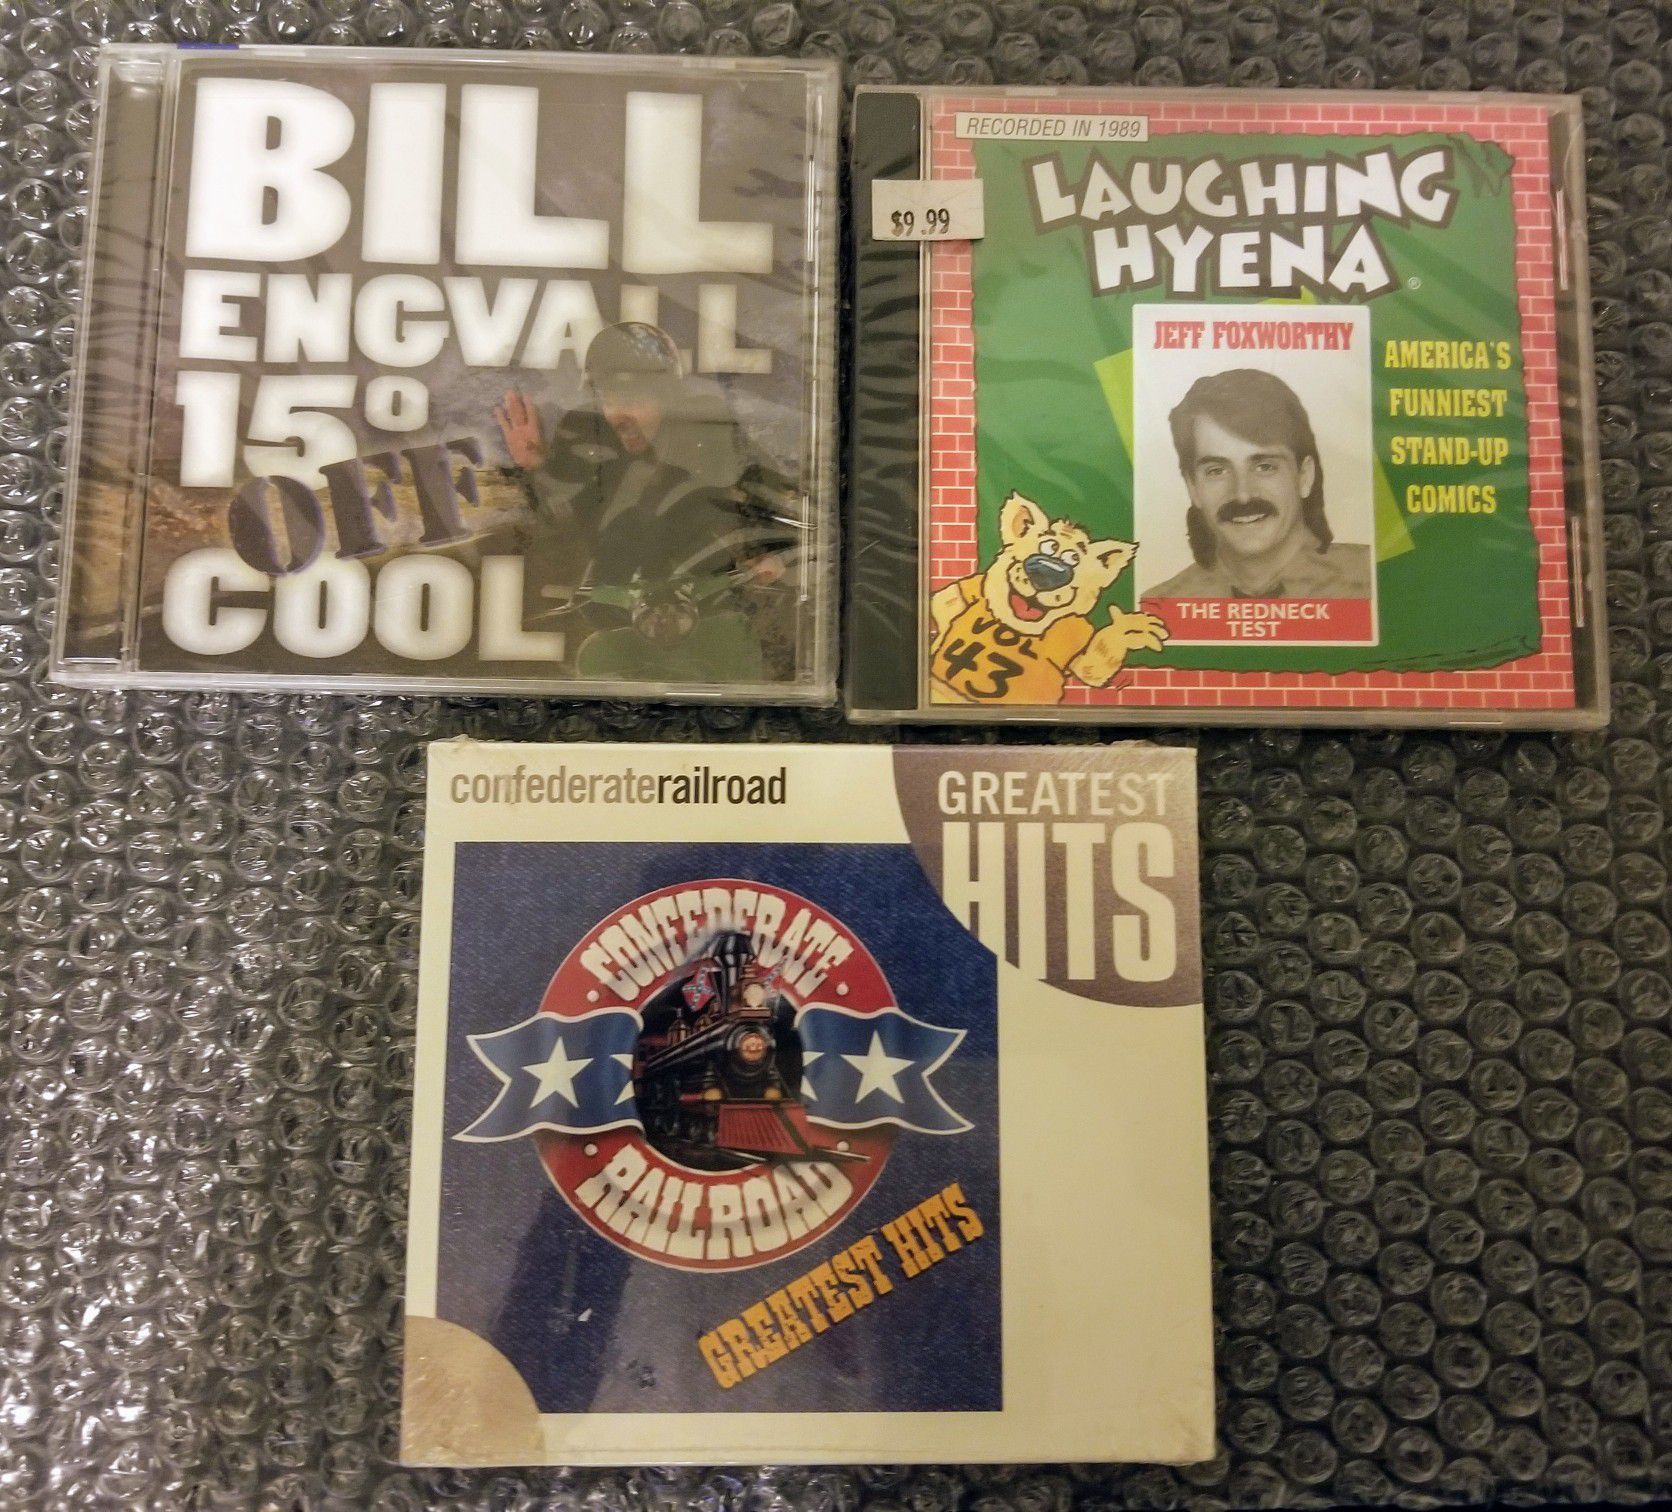 3CD Jeff Foxworthy, Bill Engvall, Confederate Railroad (greatest hits) Blue Collar/Southern Rock NEW